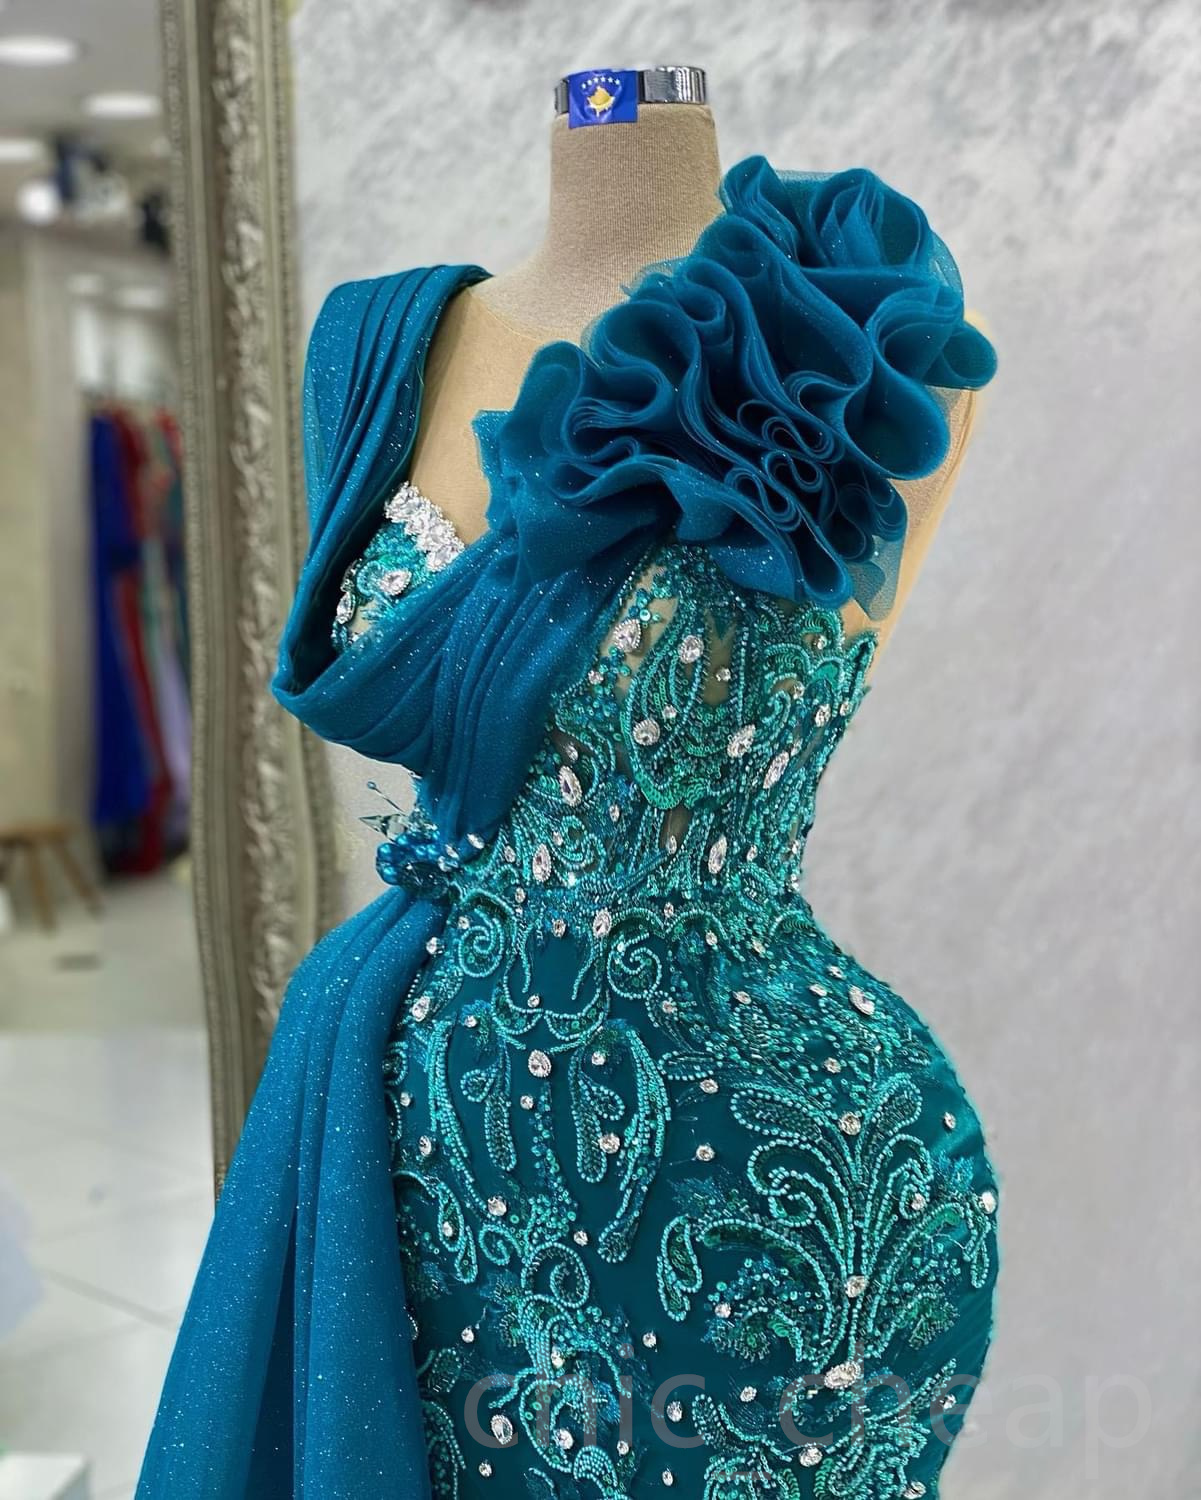 2023 May Aso Ebi Beaded Crystals Prom Dress Mermaid Sequined Lace Evening Formal Party Second Reception Birthday Engagement Gowns Dresses Robe De Soiree ZJ345